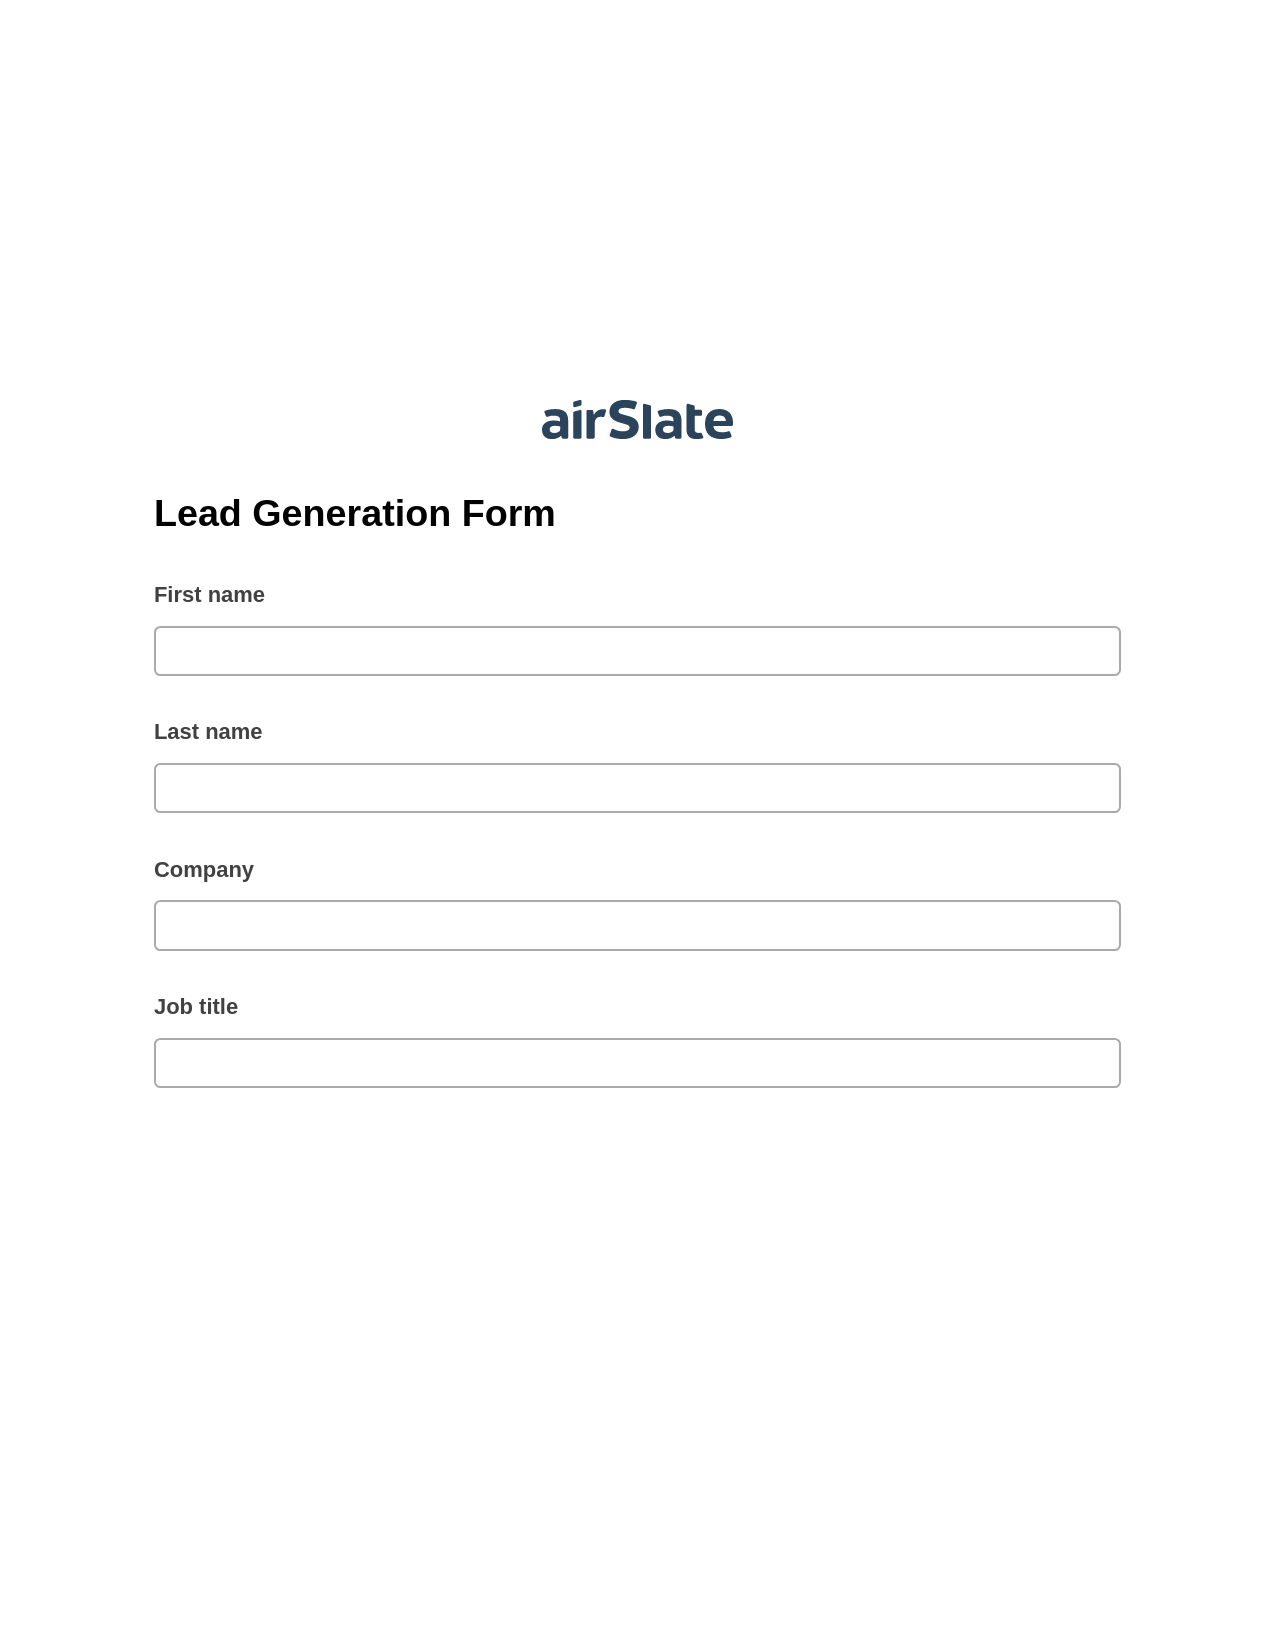 Multirole Lead Generation Form Pre-fill from Salesforce Records with SOQL Bot, Send a Slate to Salesforce Contact Bot, Archive to Google Drive Bot